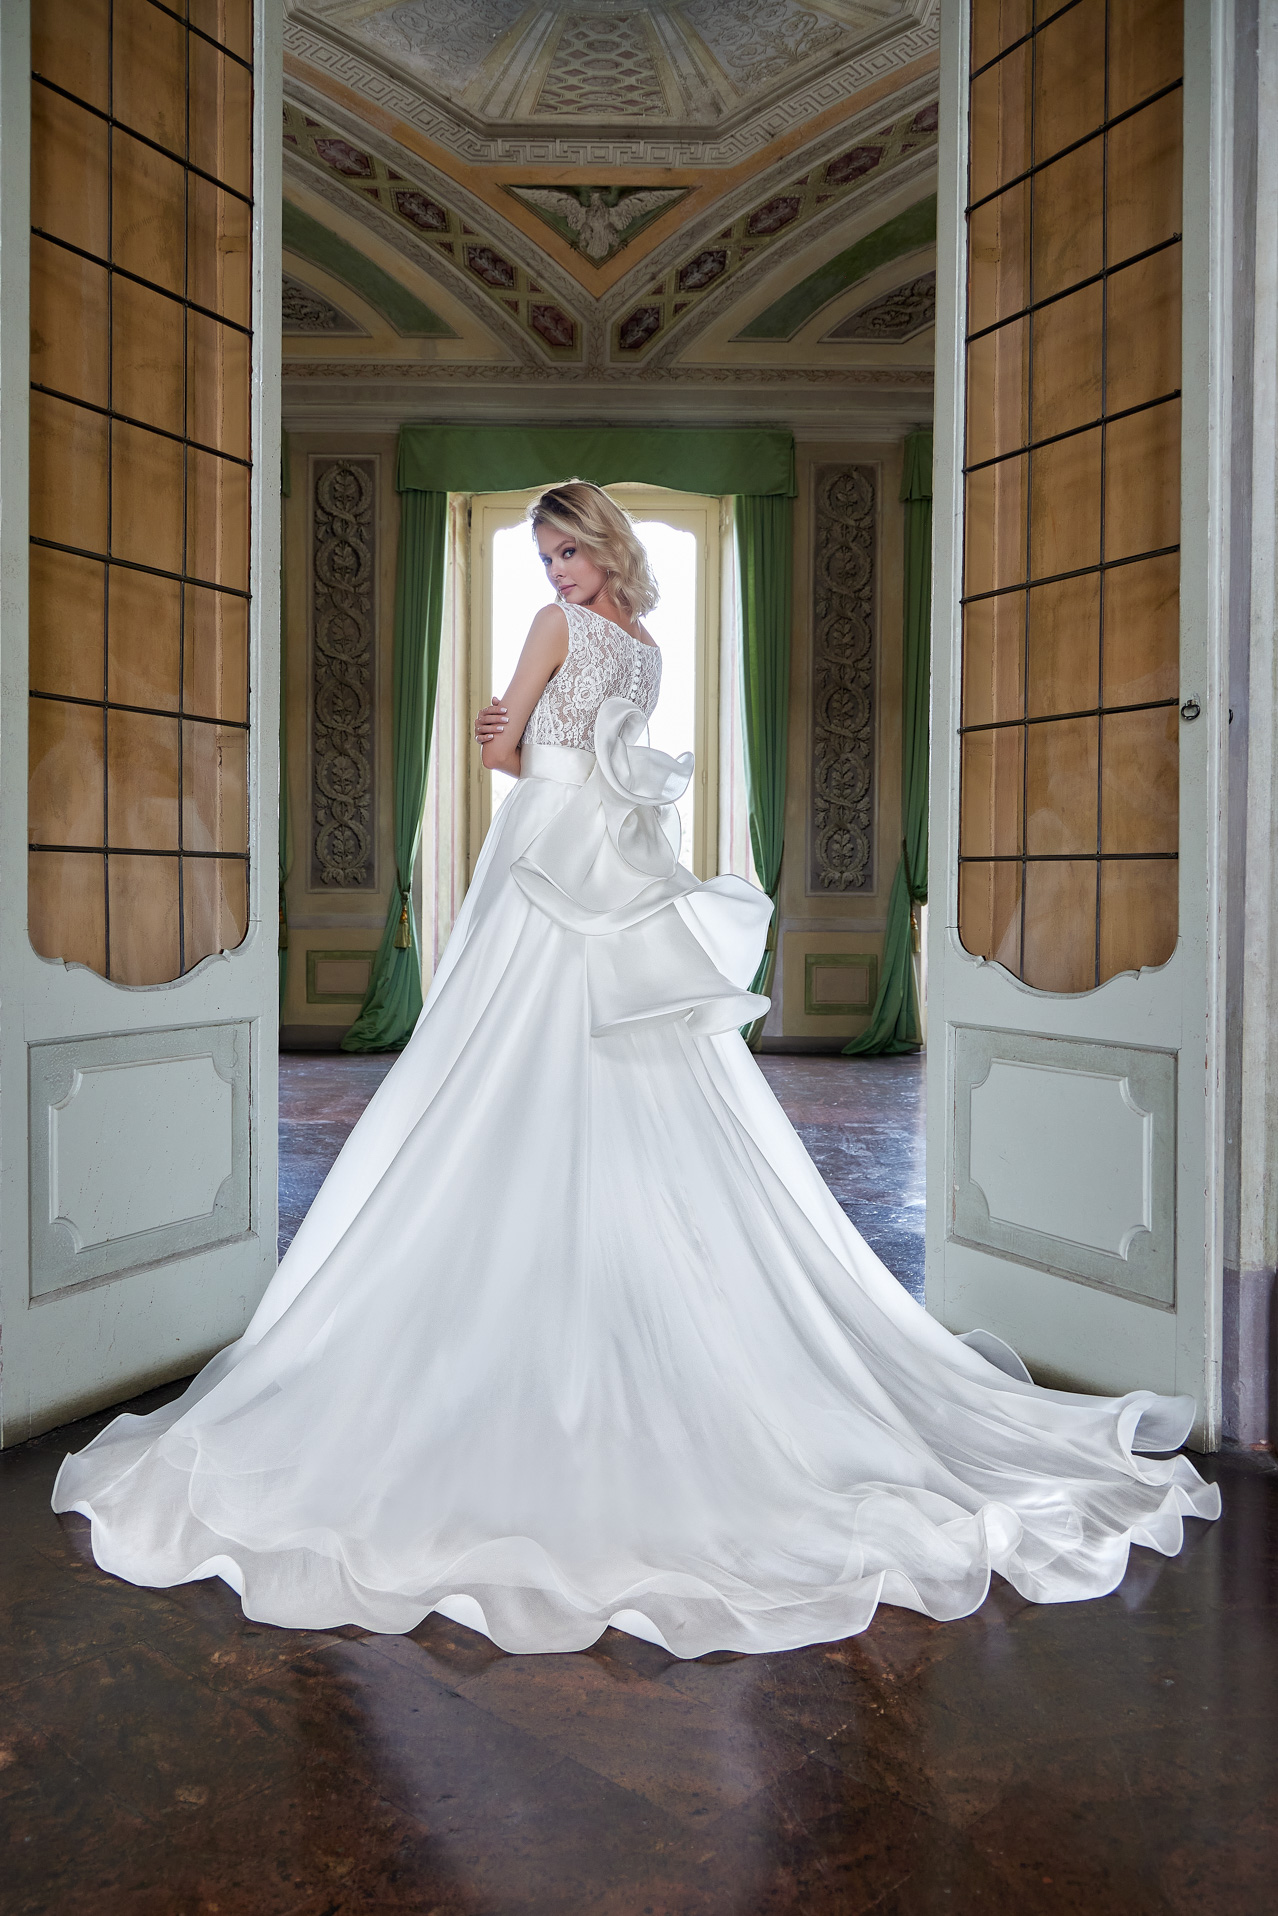 Organza Wedding Dress: A Masterpiece by Stefano Blandaleone between Dream and Style